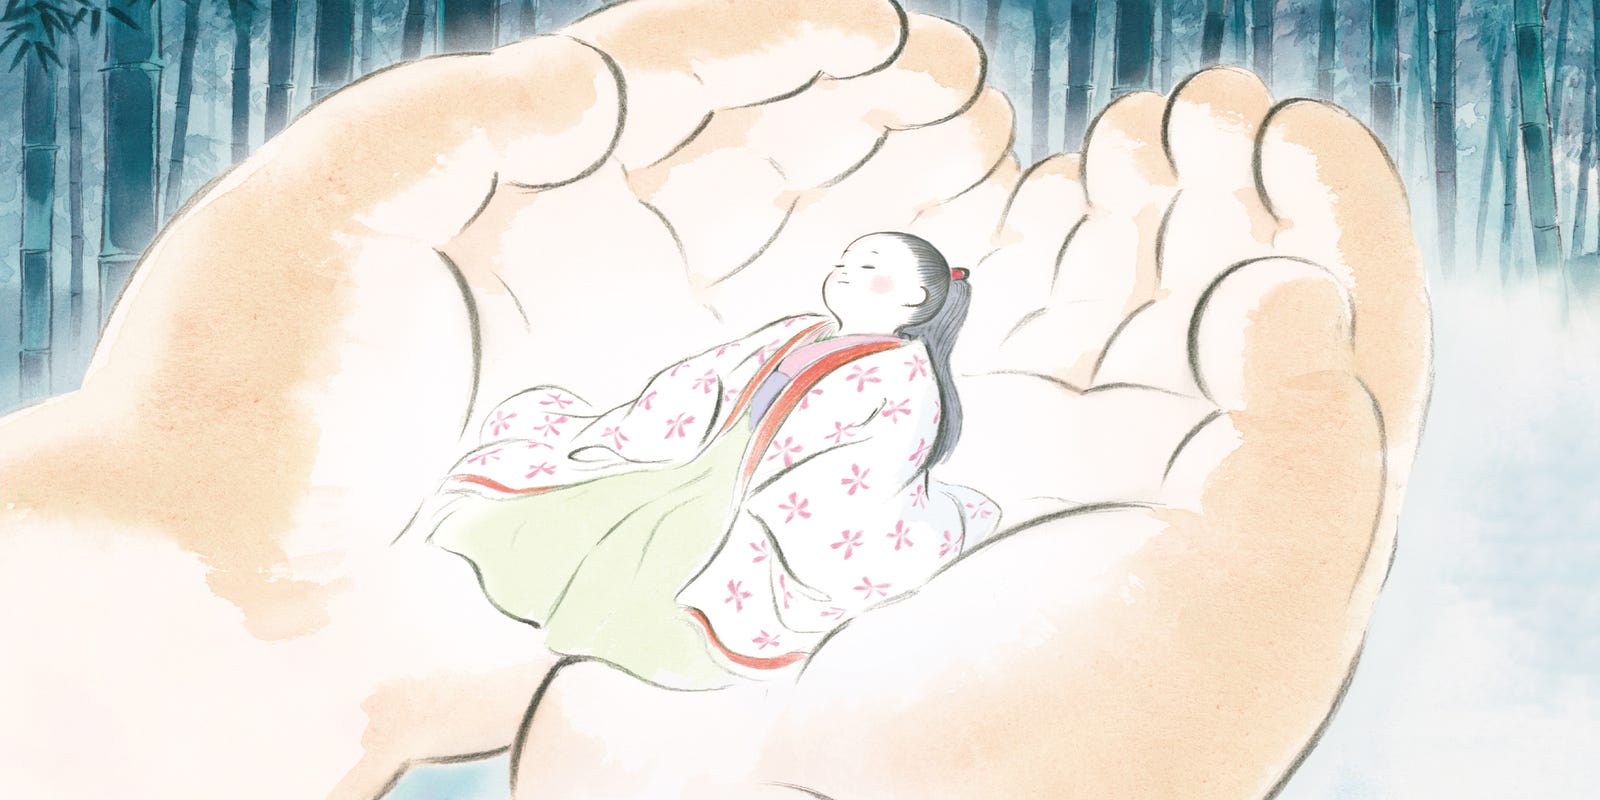 Review: 'Princess Kaguya' all that fairy tales should be